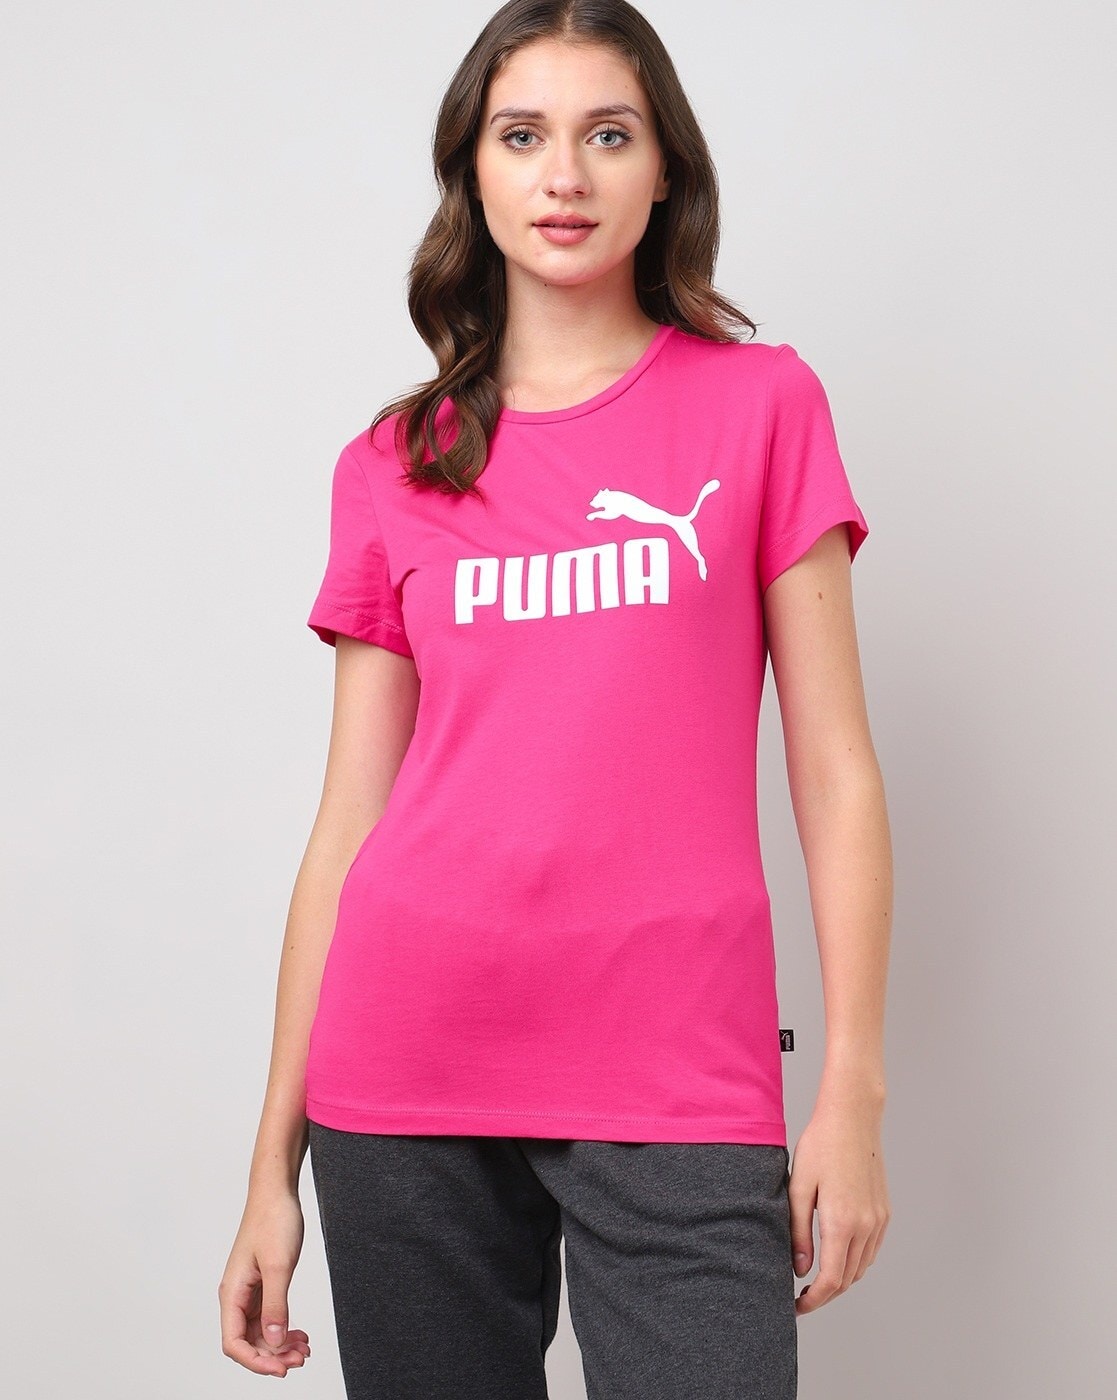 Buy by Tshirts for Puma Pink Women Online